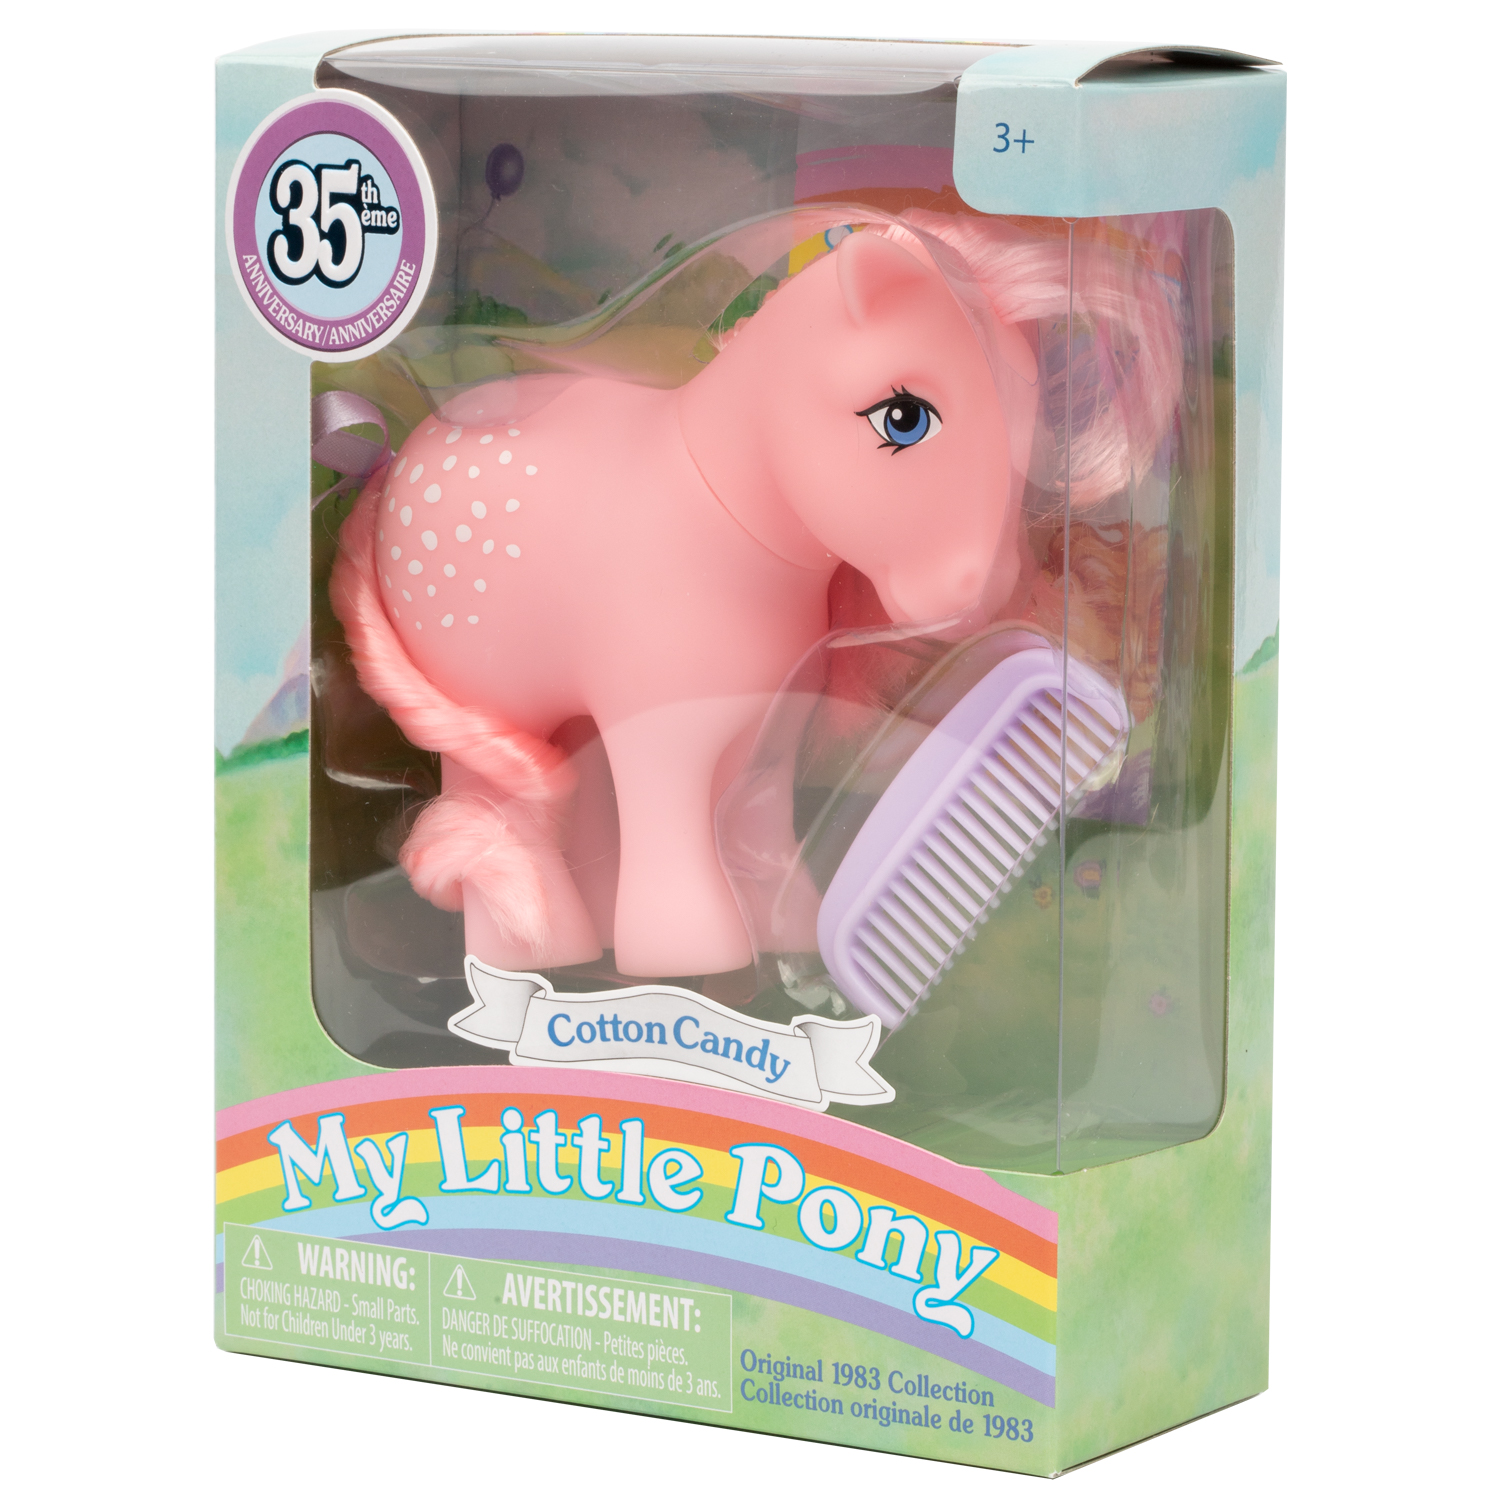 My Little Pony Classic - 35th Anniversary Collector Pony - Cotton Candy - image 2 of 3